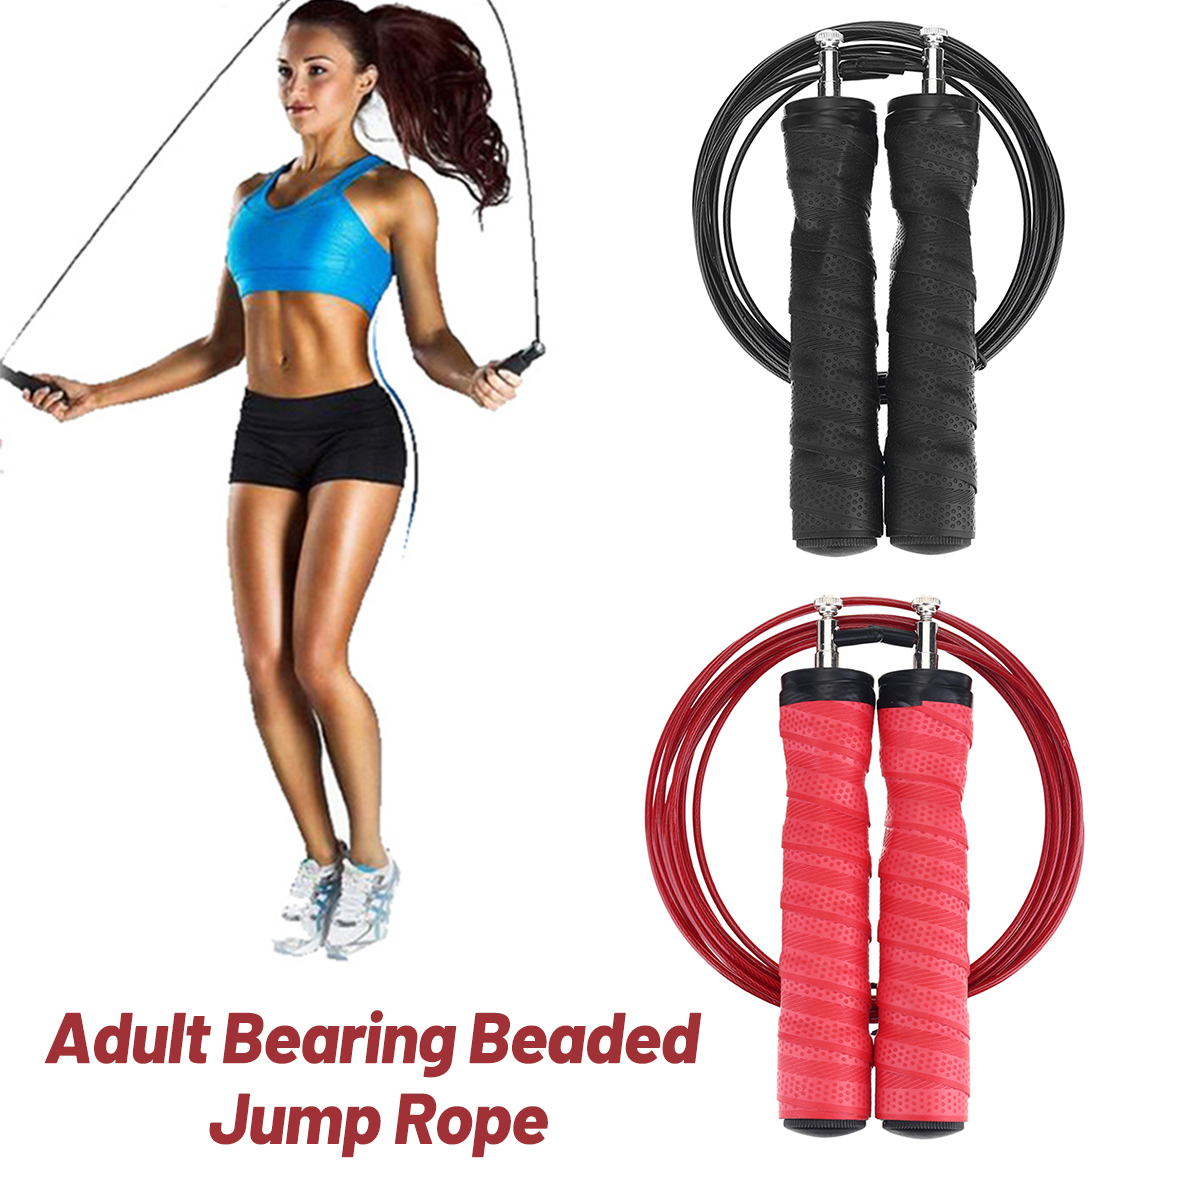 300cm-Length-Rope-Jumping-High-Speed-Aerobic-Steel-Wire-Jump-Rope-Fitness-Equipment-Skipping-1679175-1